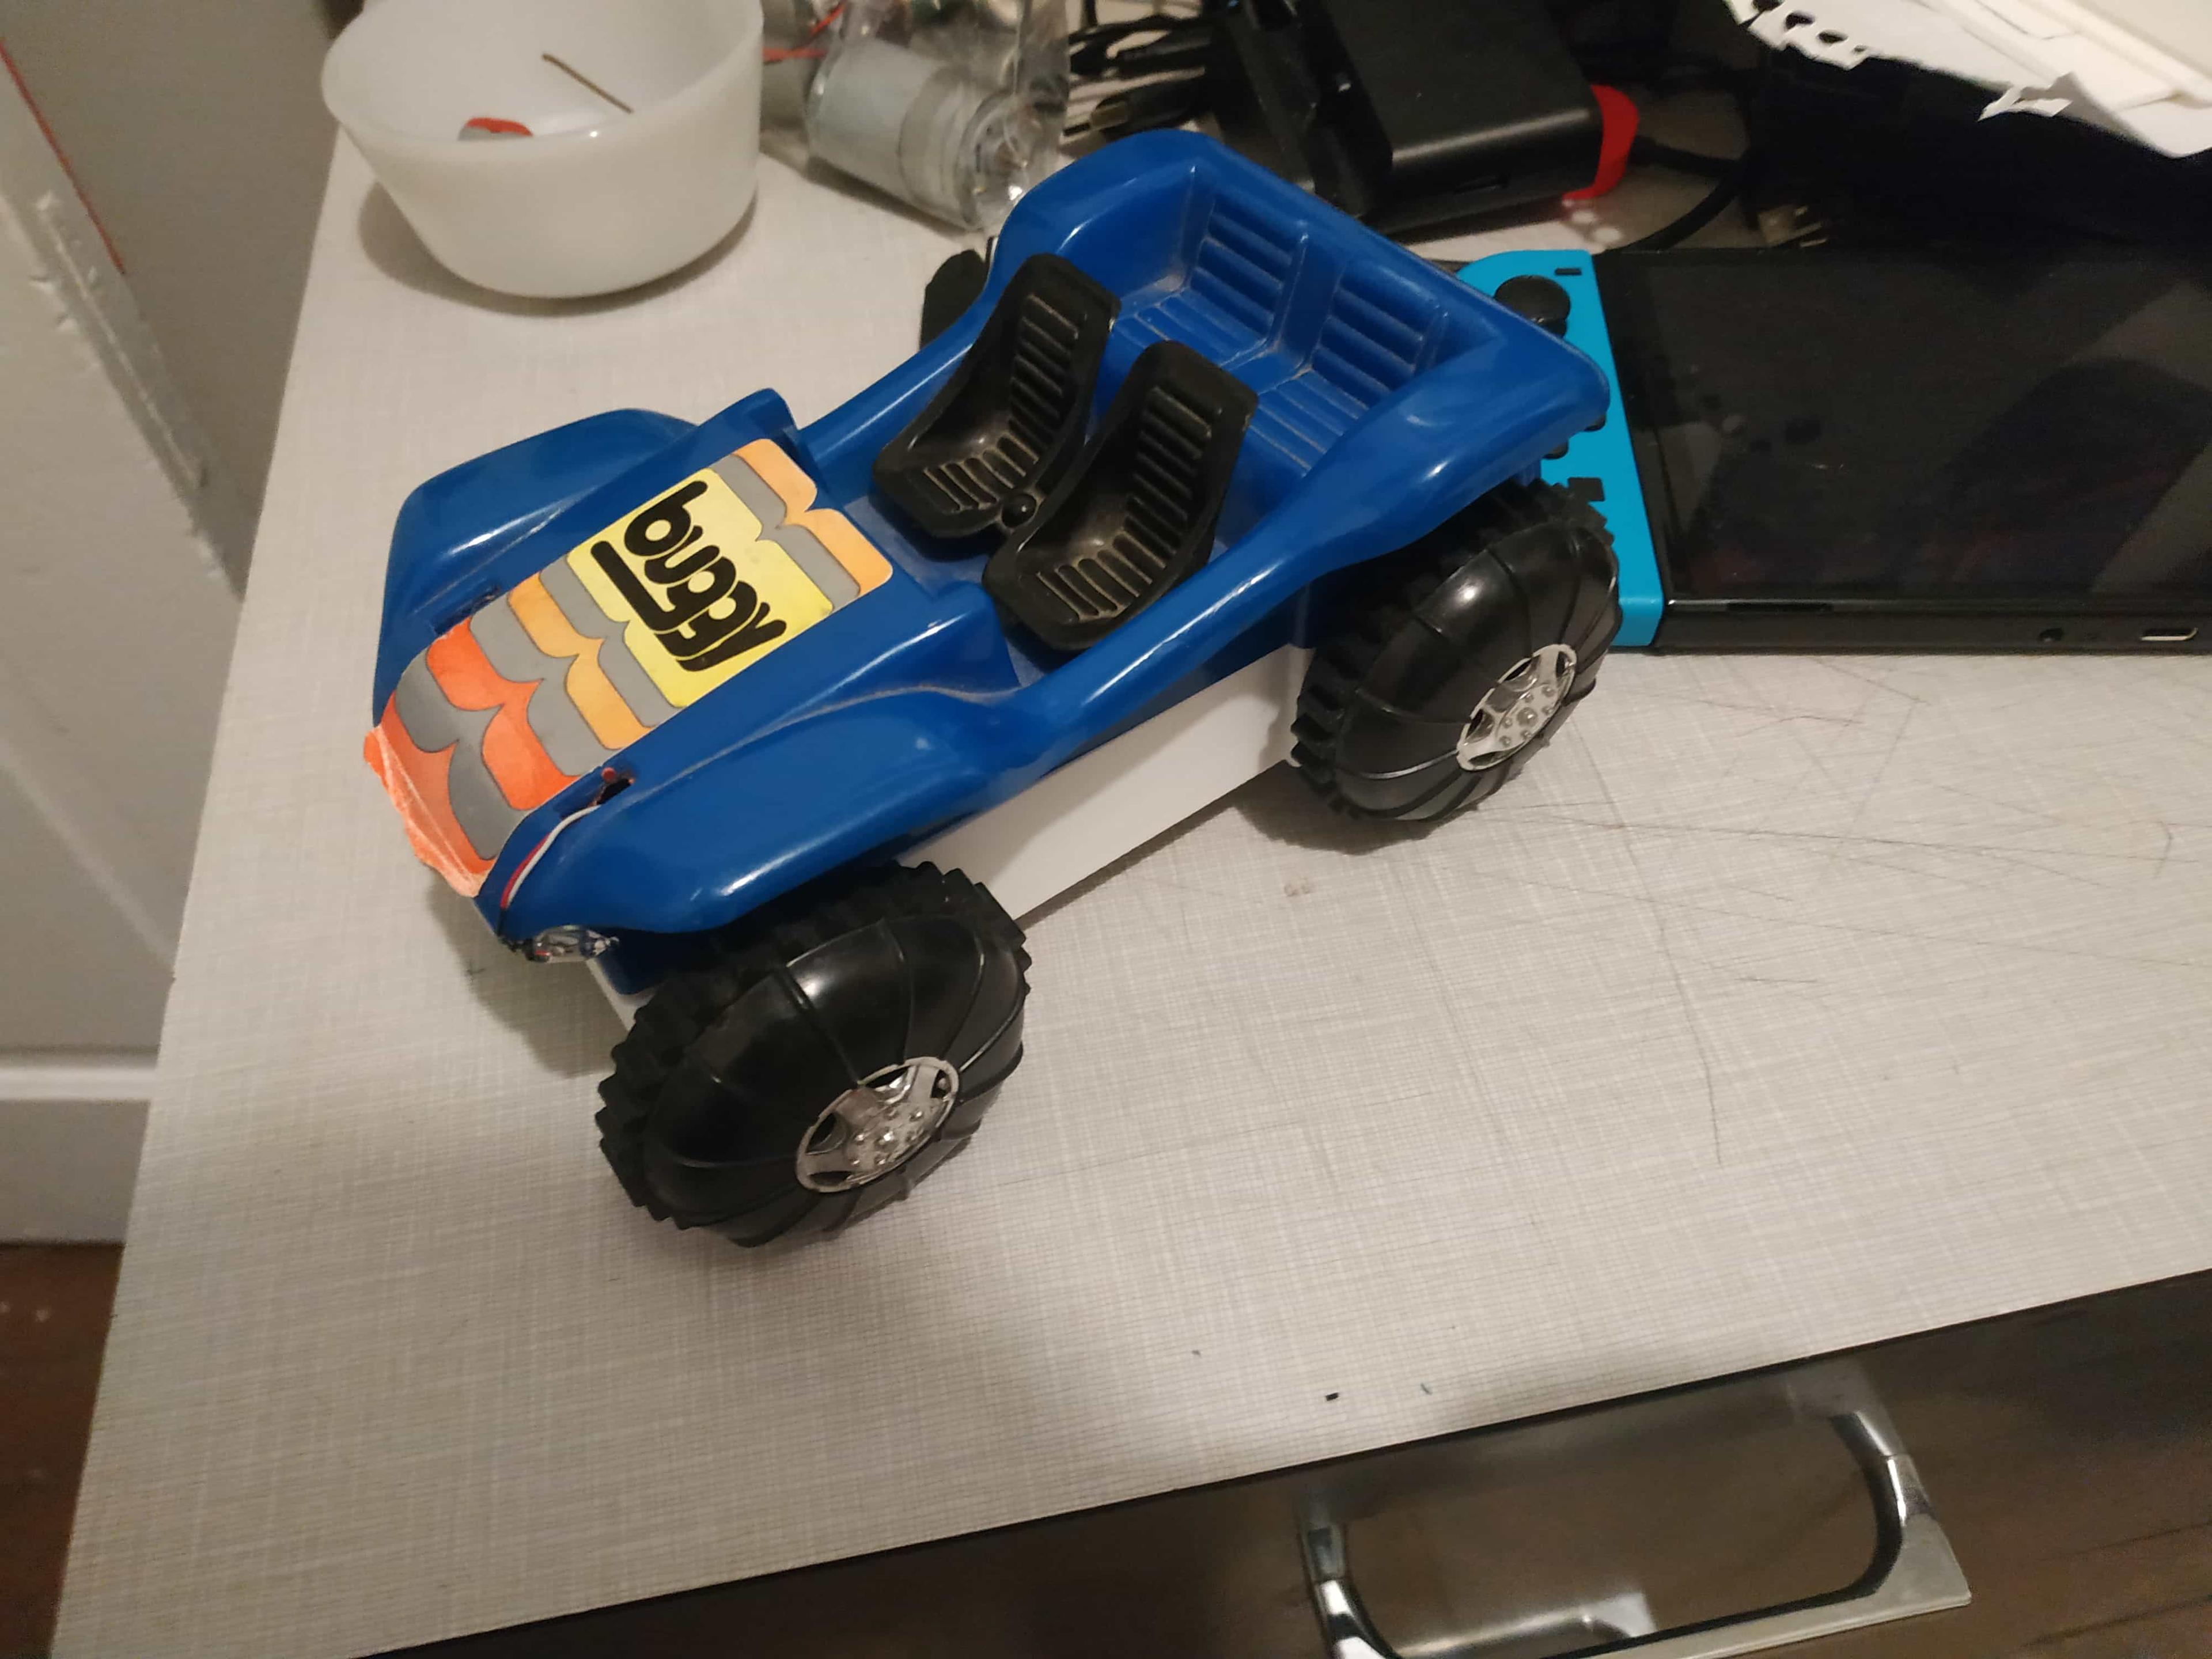 The top part of the buggy, as well as its drivetrain, have been successfully connected to my 3D printed base